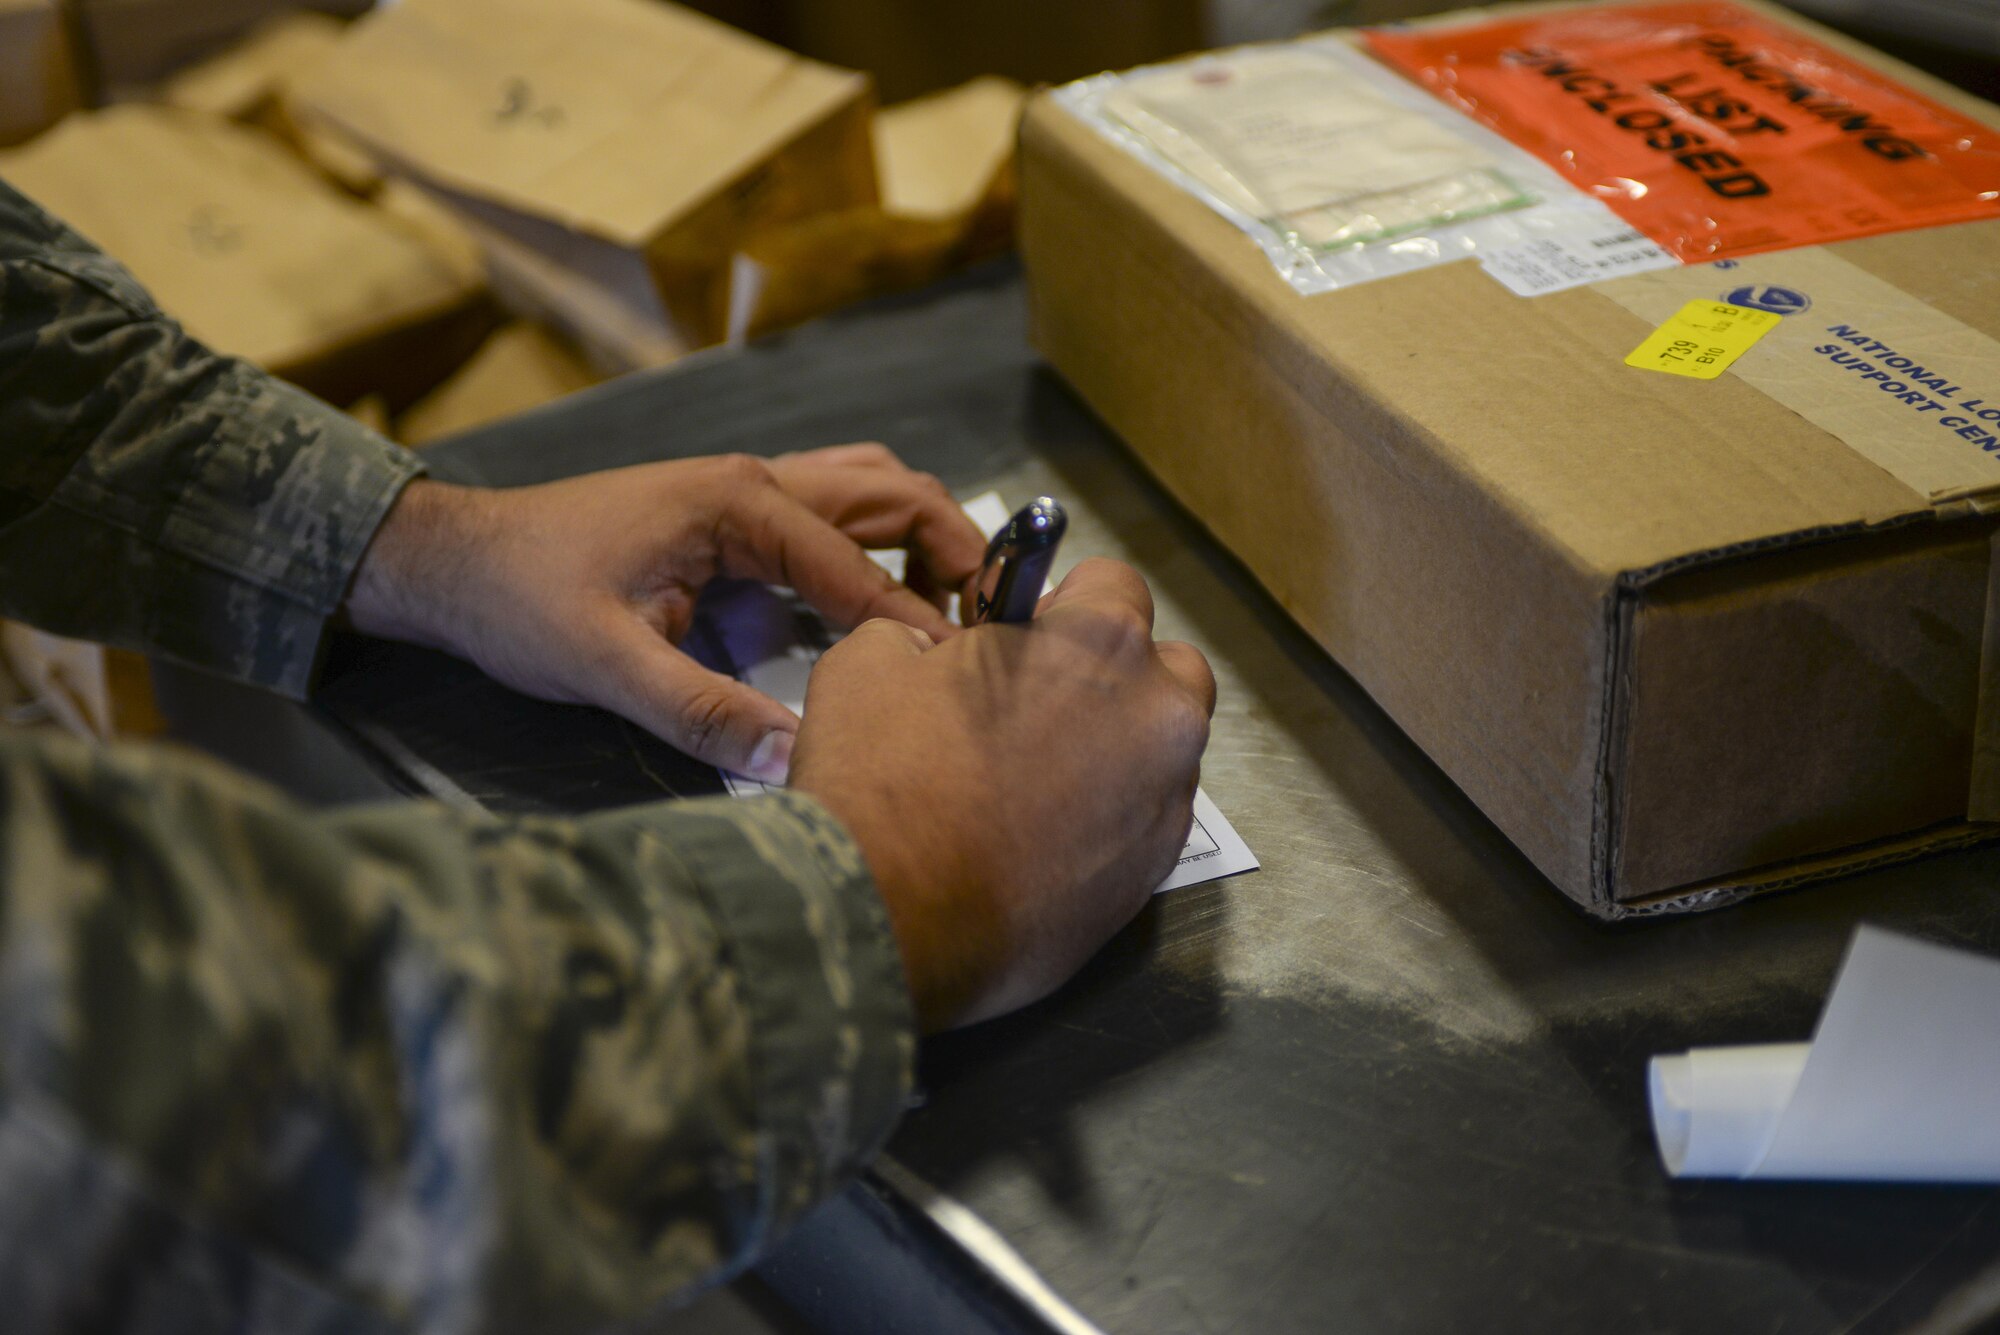 Senior Airman Thiago Gandarillas, 99th Logistics Readiness Squadron acting NCO in charge of planning and packaging, fills out a form while preparing a package for shipment at Nellis Air Force Base, Nev., on April 18, 2016. With over 40 percent of traffic management personnel deployed at all times, this team thrived through expert training and cross-utilization of talents to help with mission support, readiness and made significant and lasting contributions to the Nellis AFB, Creech AFB and Nevada Test and Training Range team as well as to the U.S. Air Force Warfare Center mission. (Air Force photo by Airman 1st Class Nathan Byrnes)